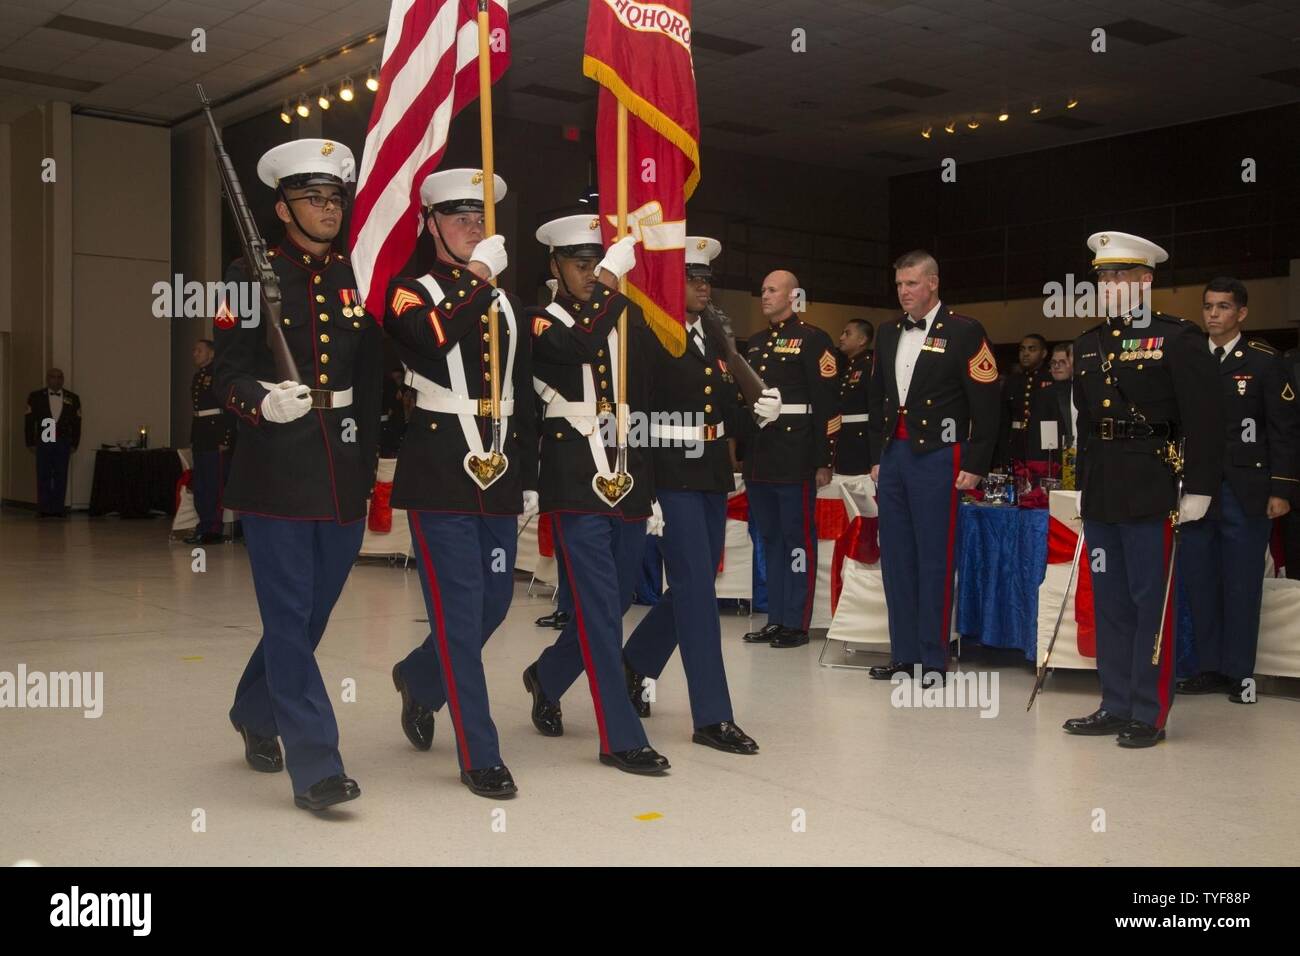 U.S. Marines with the Marine Corps Air Station New River (MCAS New River) color guard march the colors during the Headquarters and Headquarters Squadron MCAS New River 241st Marine Corps Birthday Ball at the Crystal Coast Civic Center, Morehead City, N.C., Nov. 5, 2016. The Marine Corps has carried 241 years of traditions, values and standards since its establishment in 1775. Stock Photo